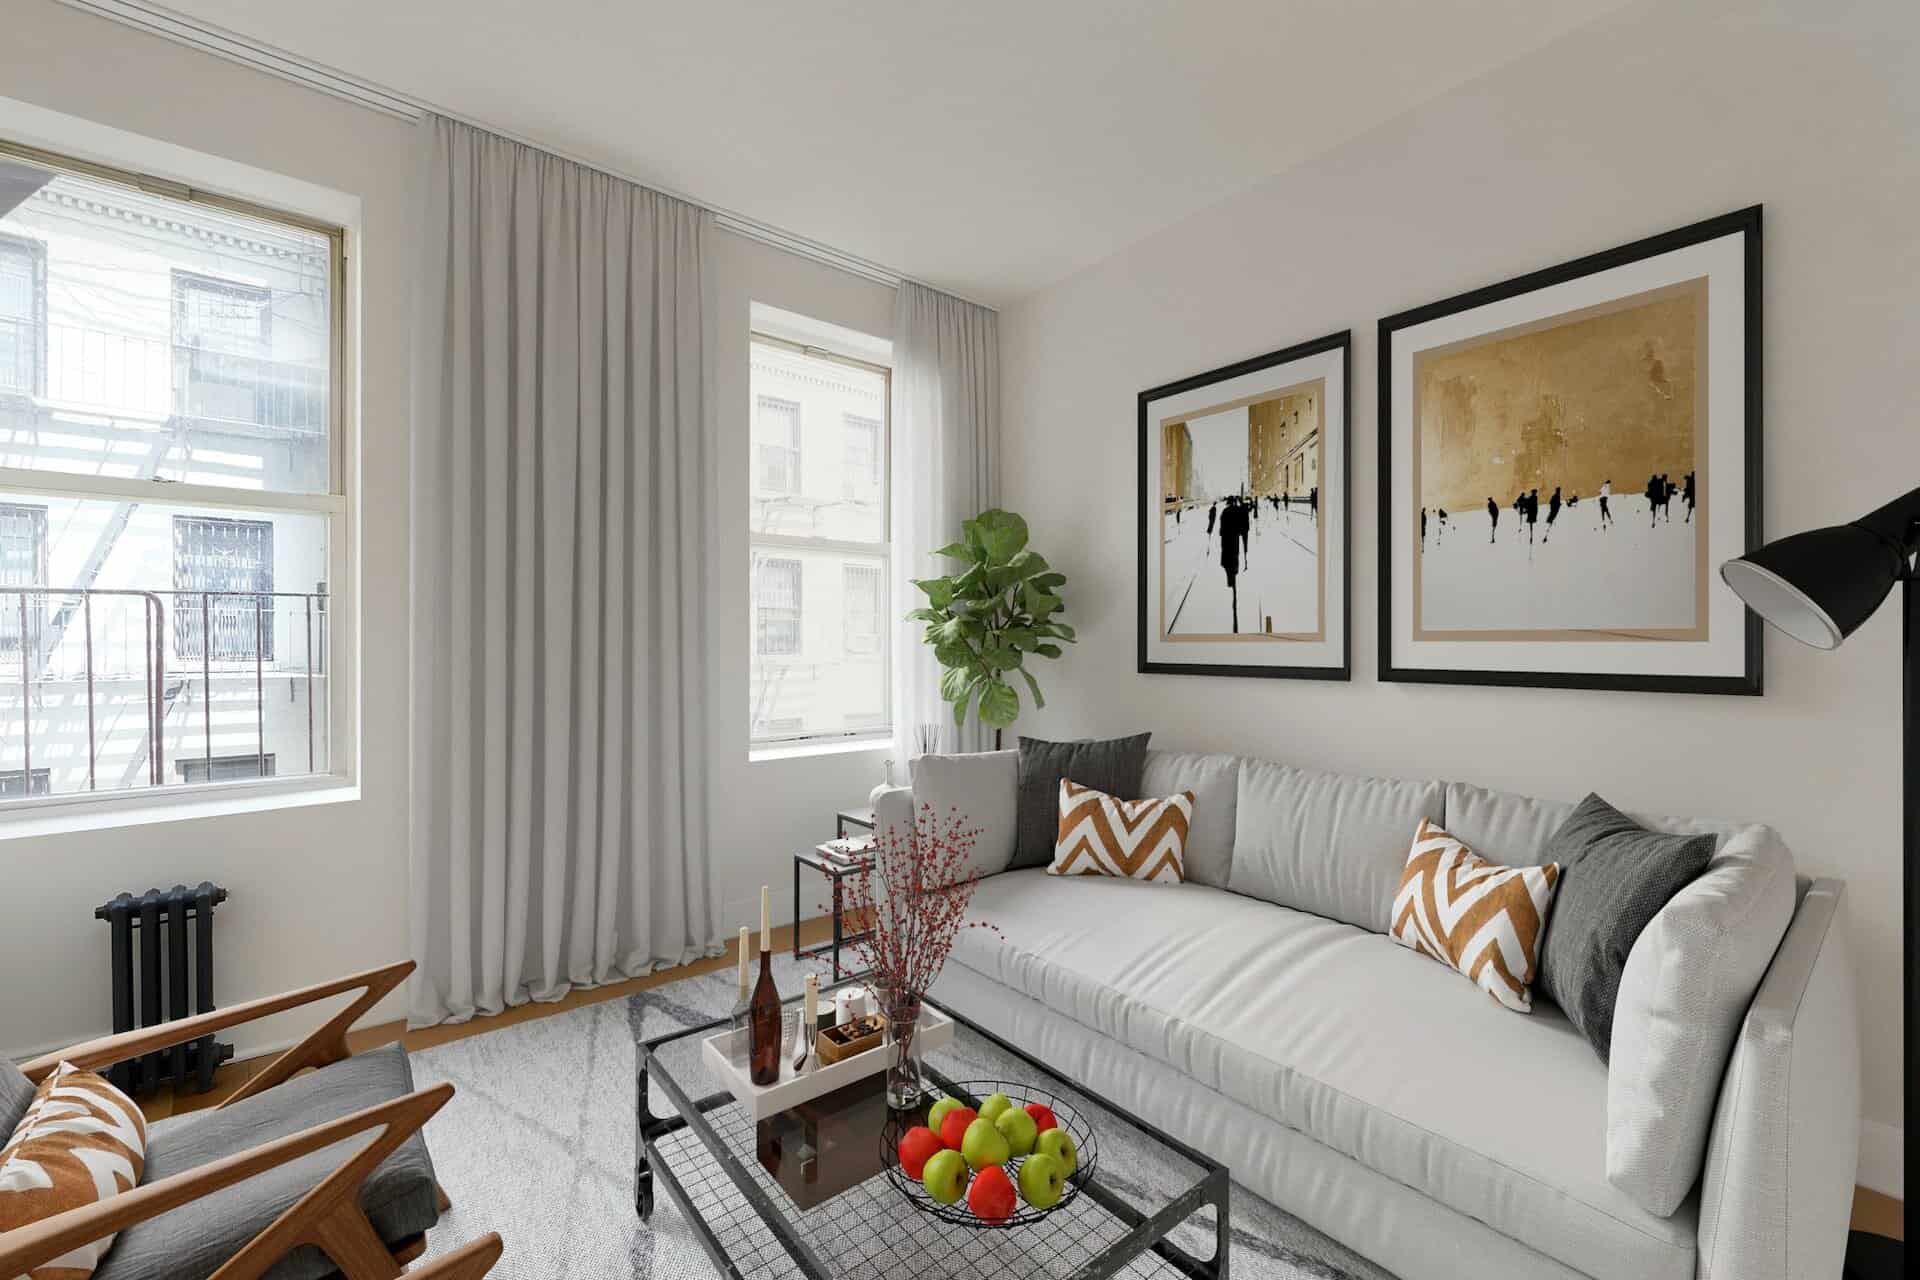 Living room at 207 East 33rd Street apartments with hardwood floors, two tall windows, a couch and glass coffee table.